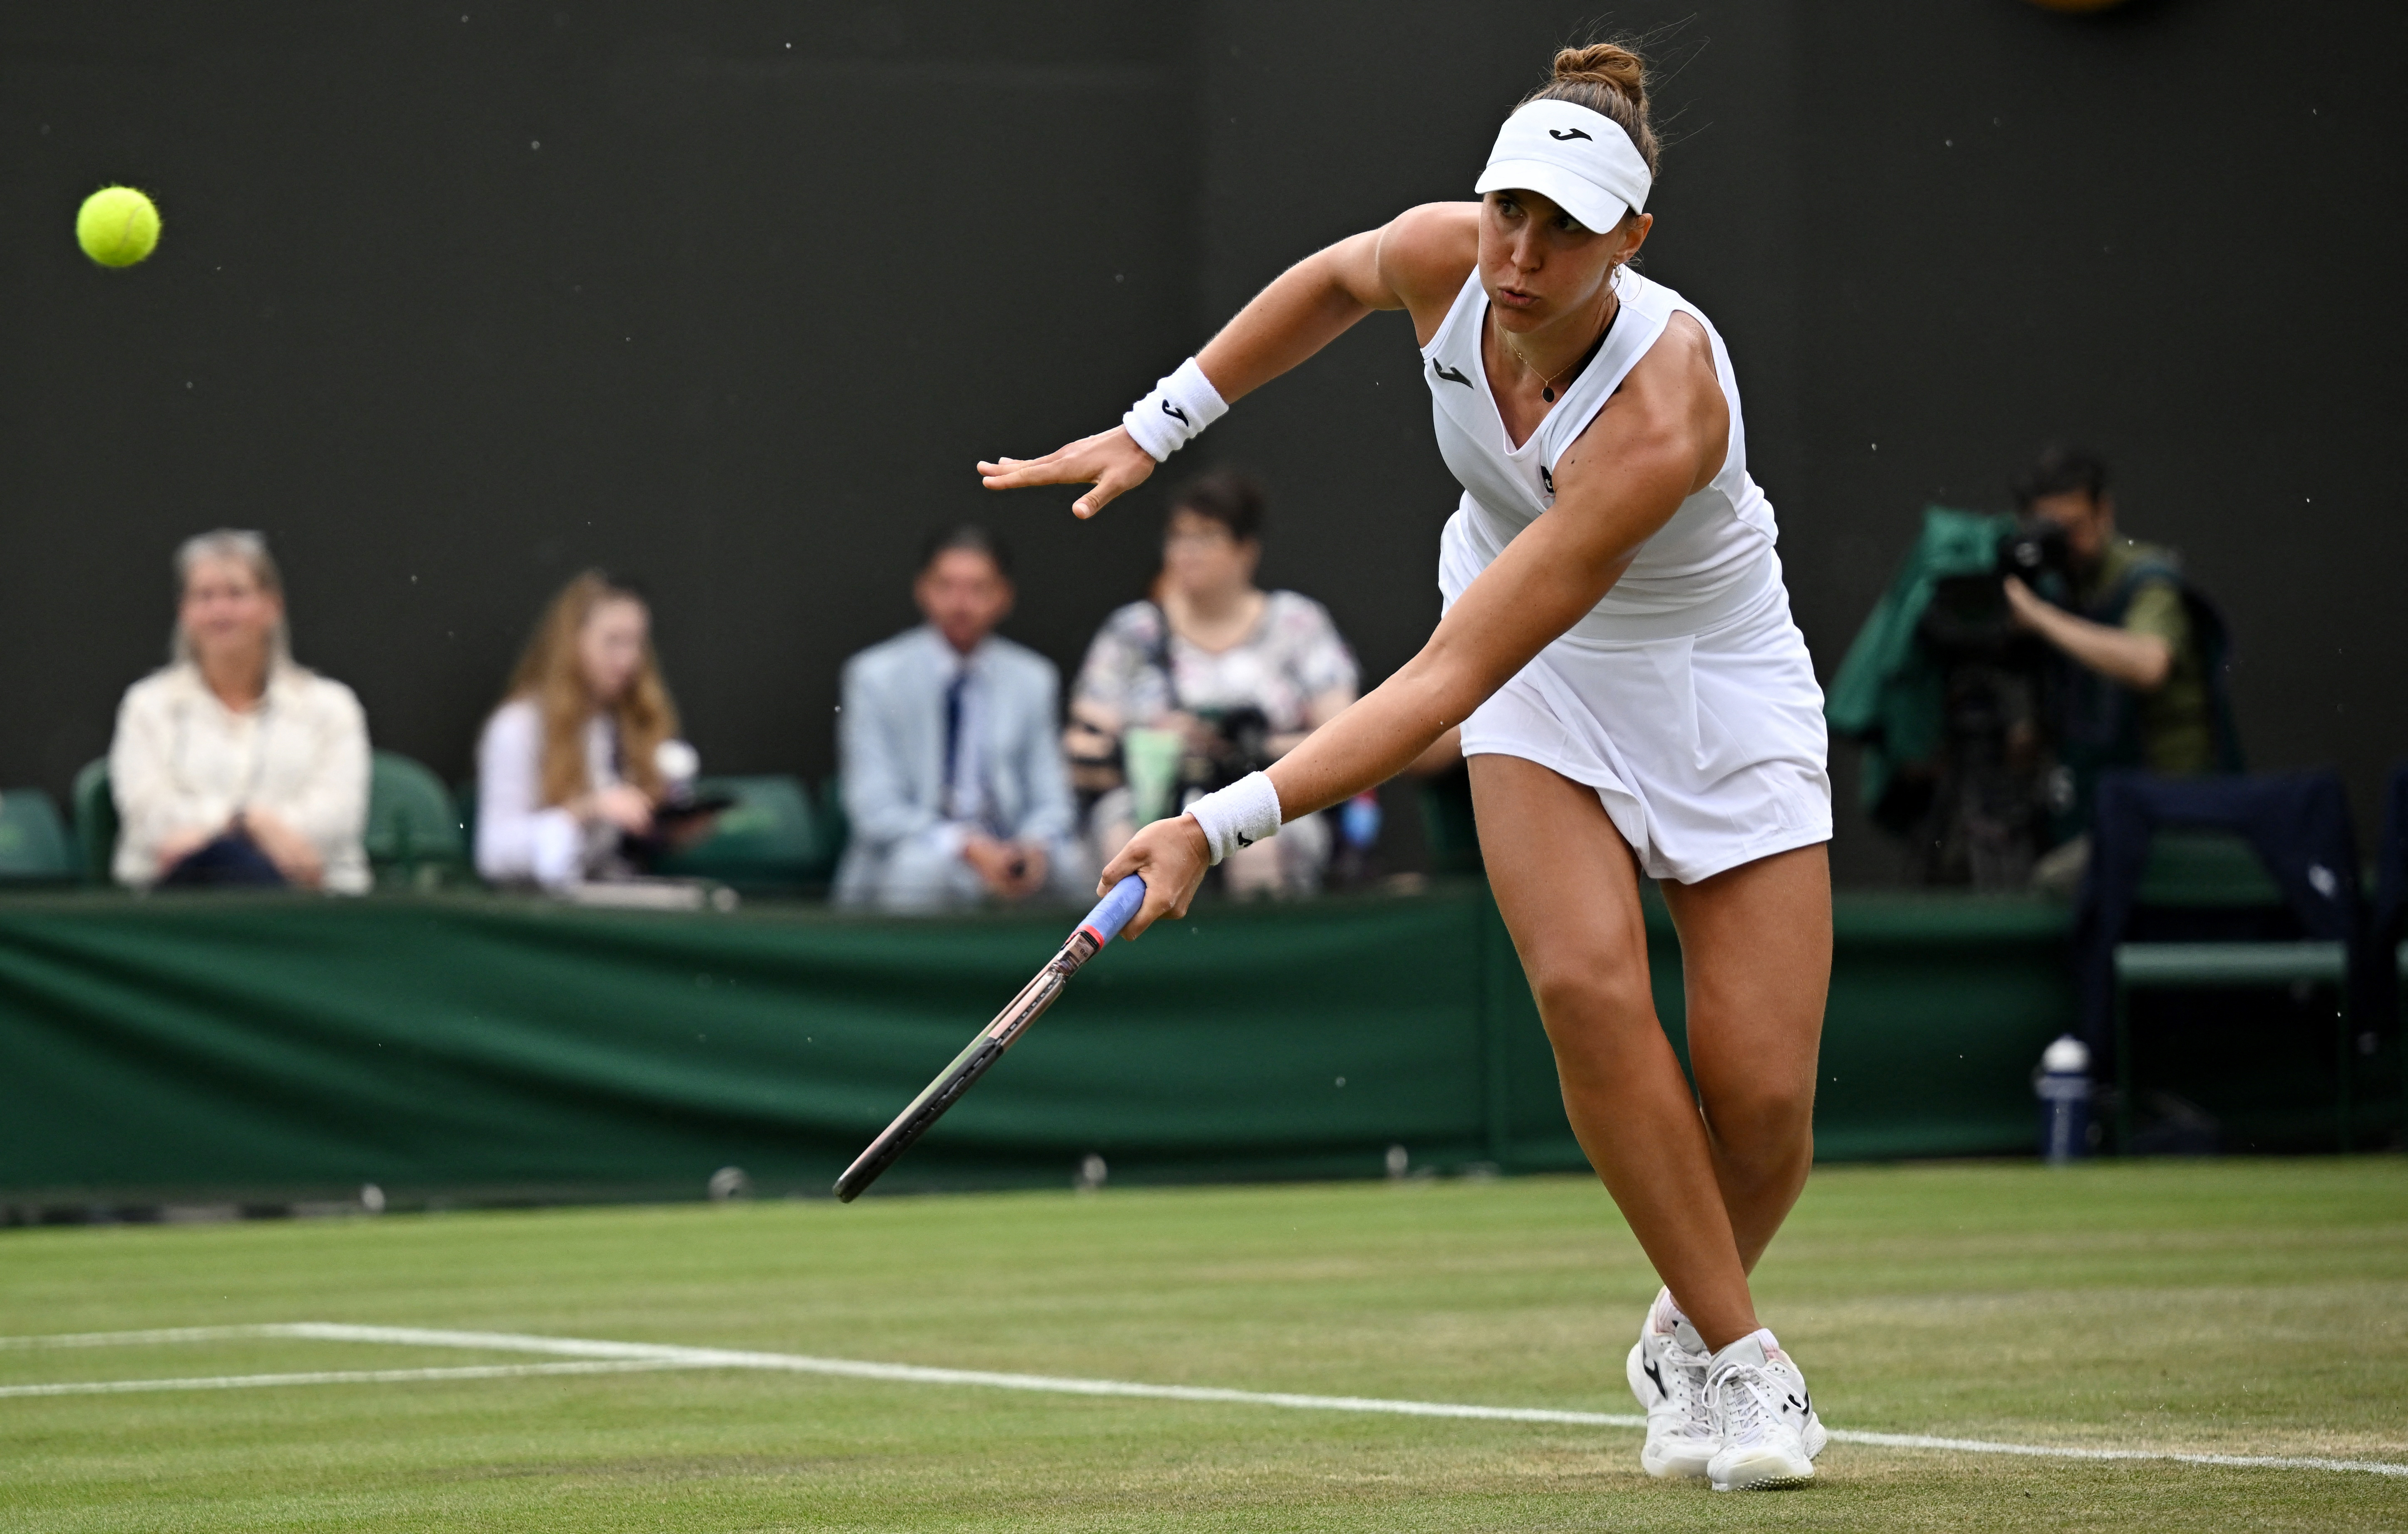 Haddad Maia beats Cirstea in nick of time before rain sets in Reuters